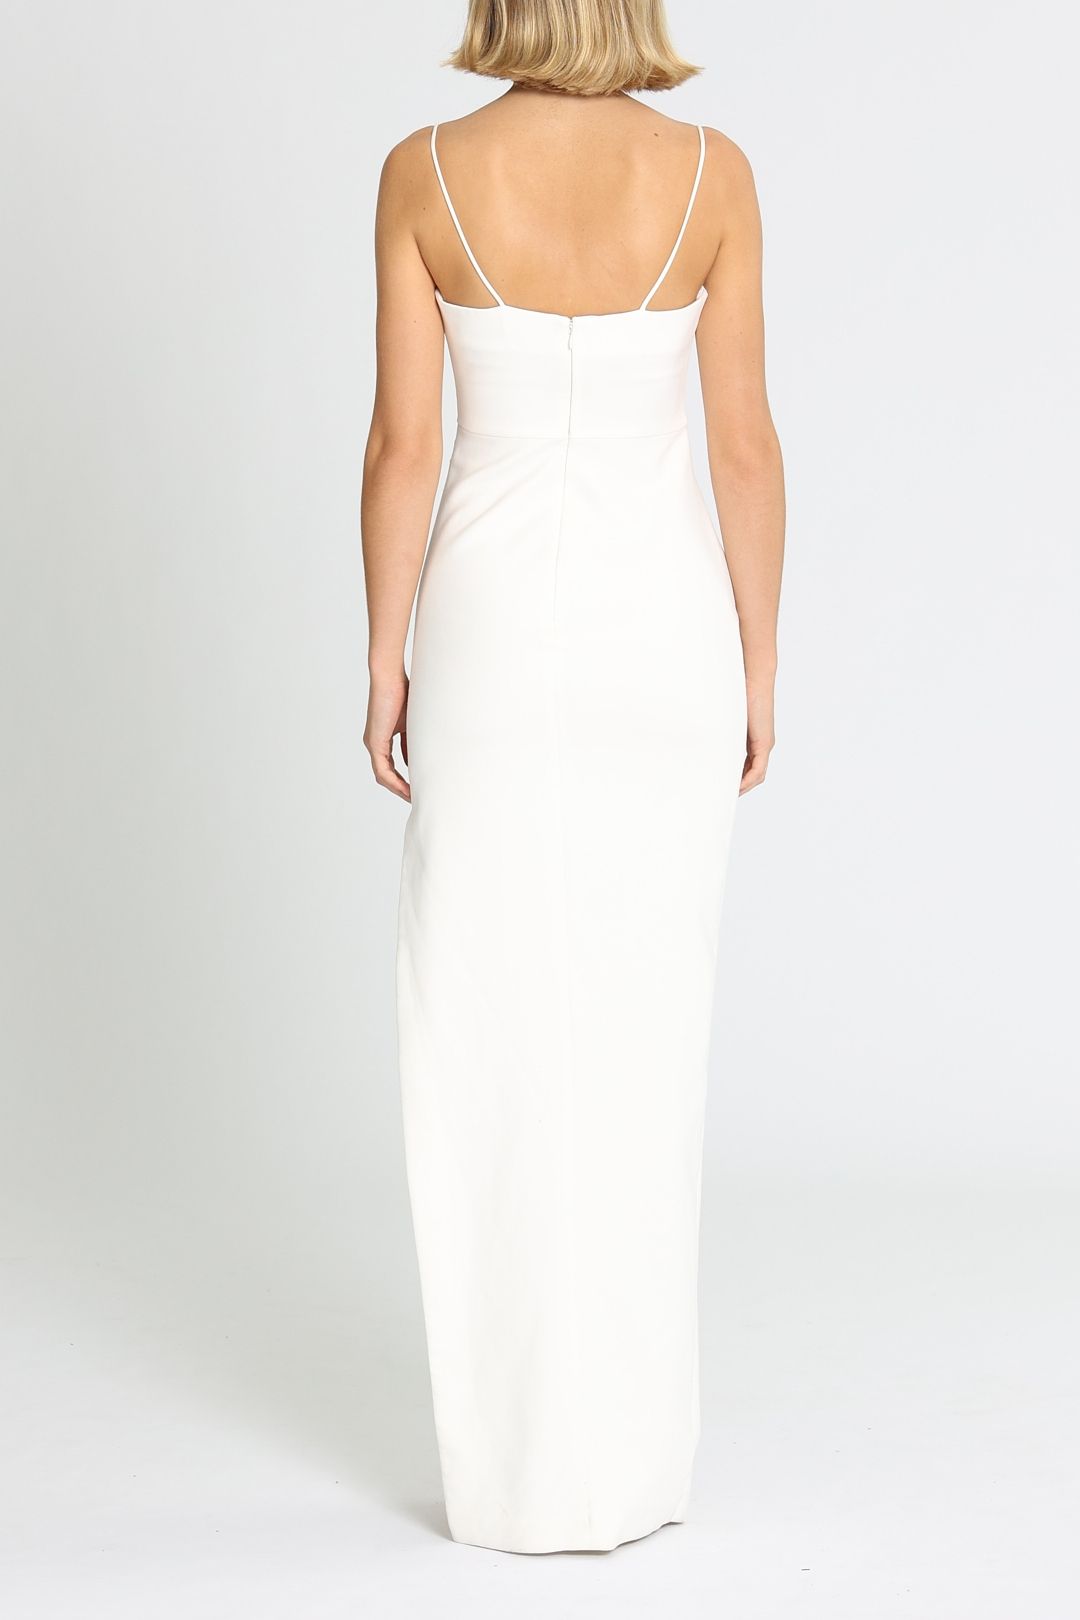 Likely NYC Celida Gown Maxi